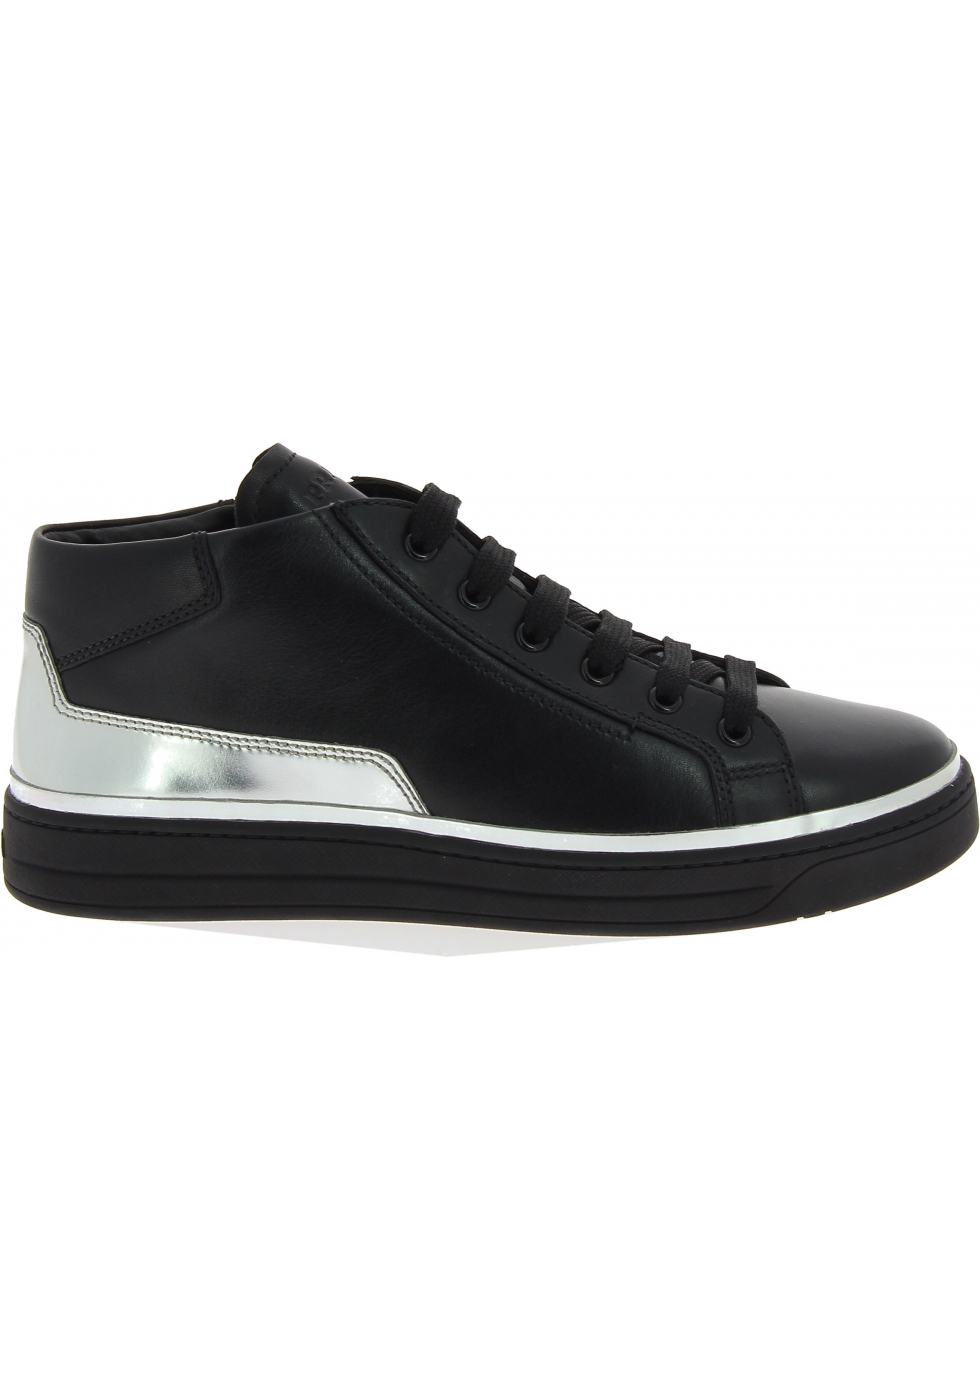 Prada Women&#39;s high top lace-ups sneakers shoes in black silver calf leather - Italian Boutique